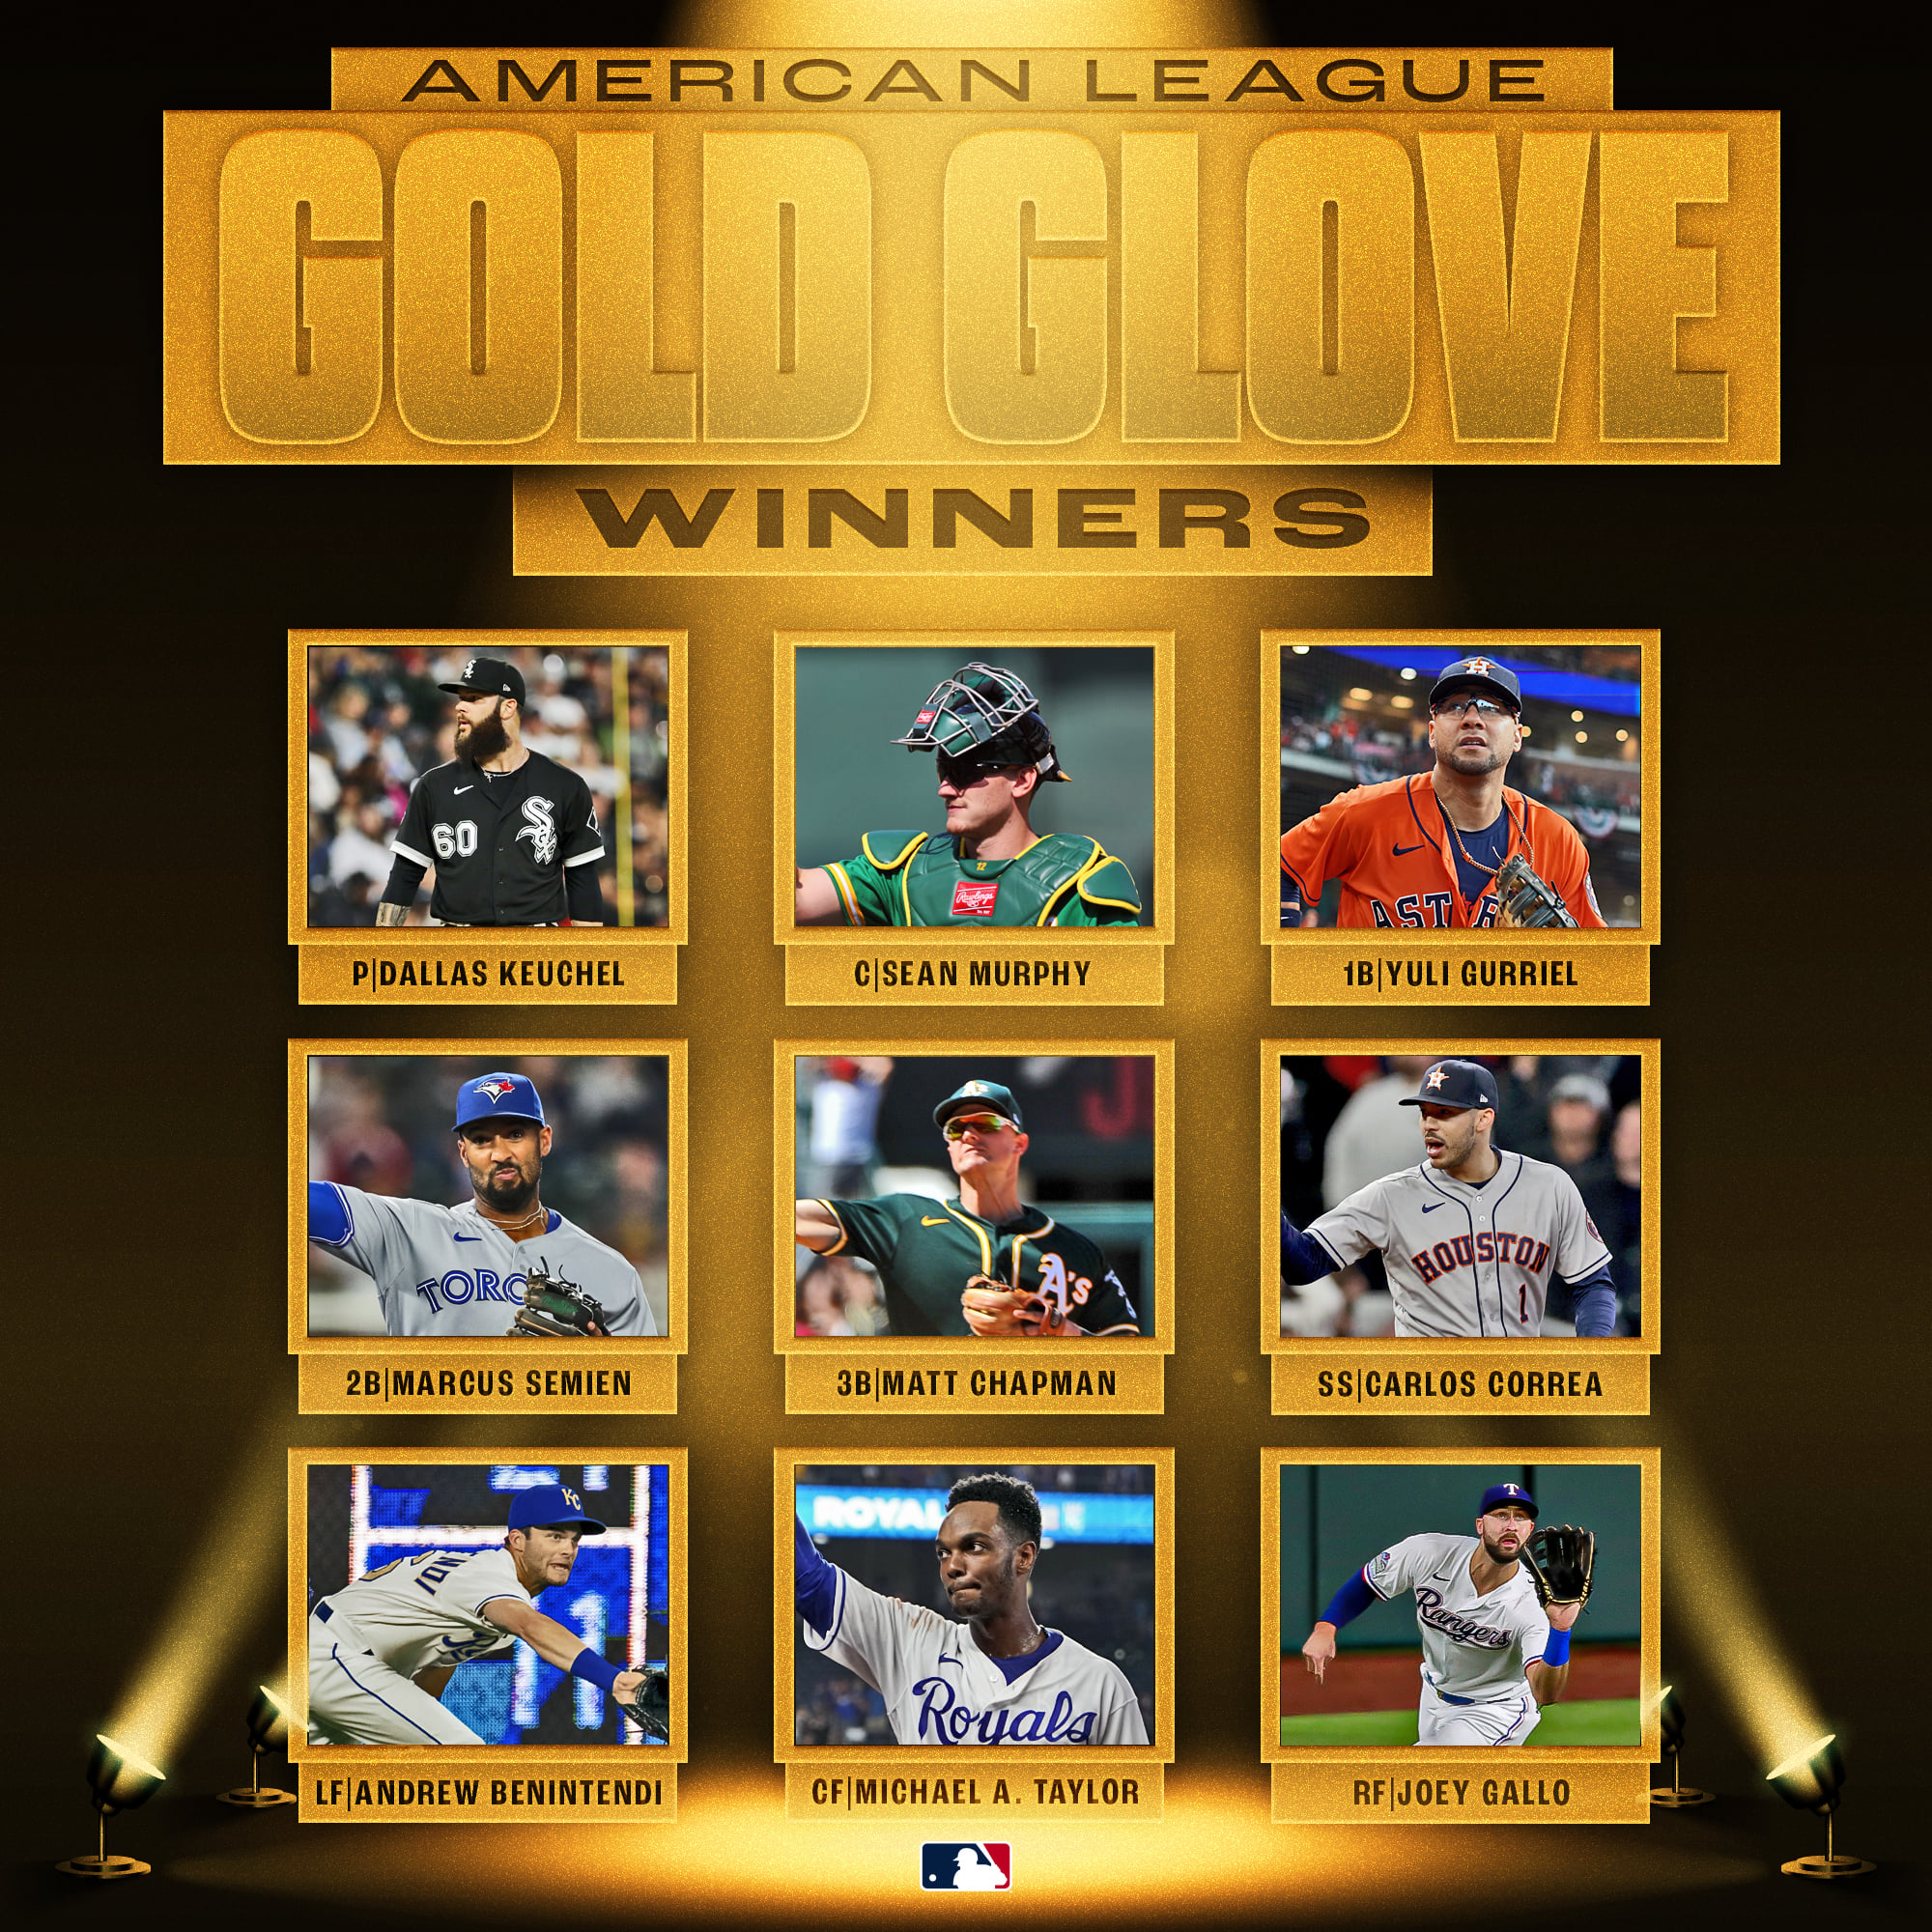 2021 MLB Awards: MVP, Cy Young, Rookie of the Year, Gold Glove